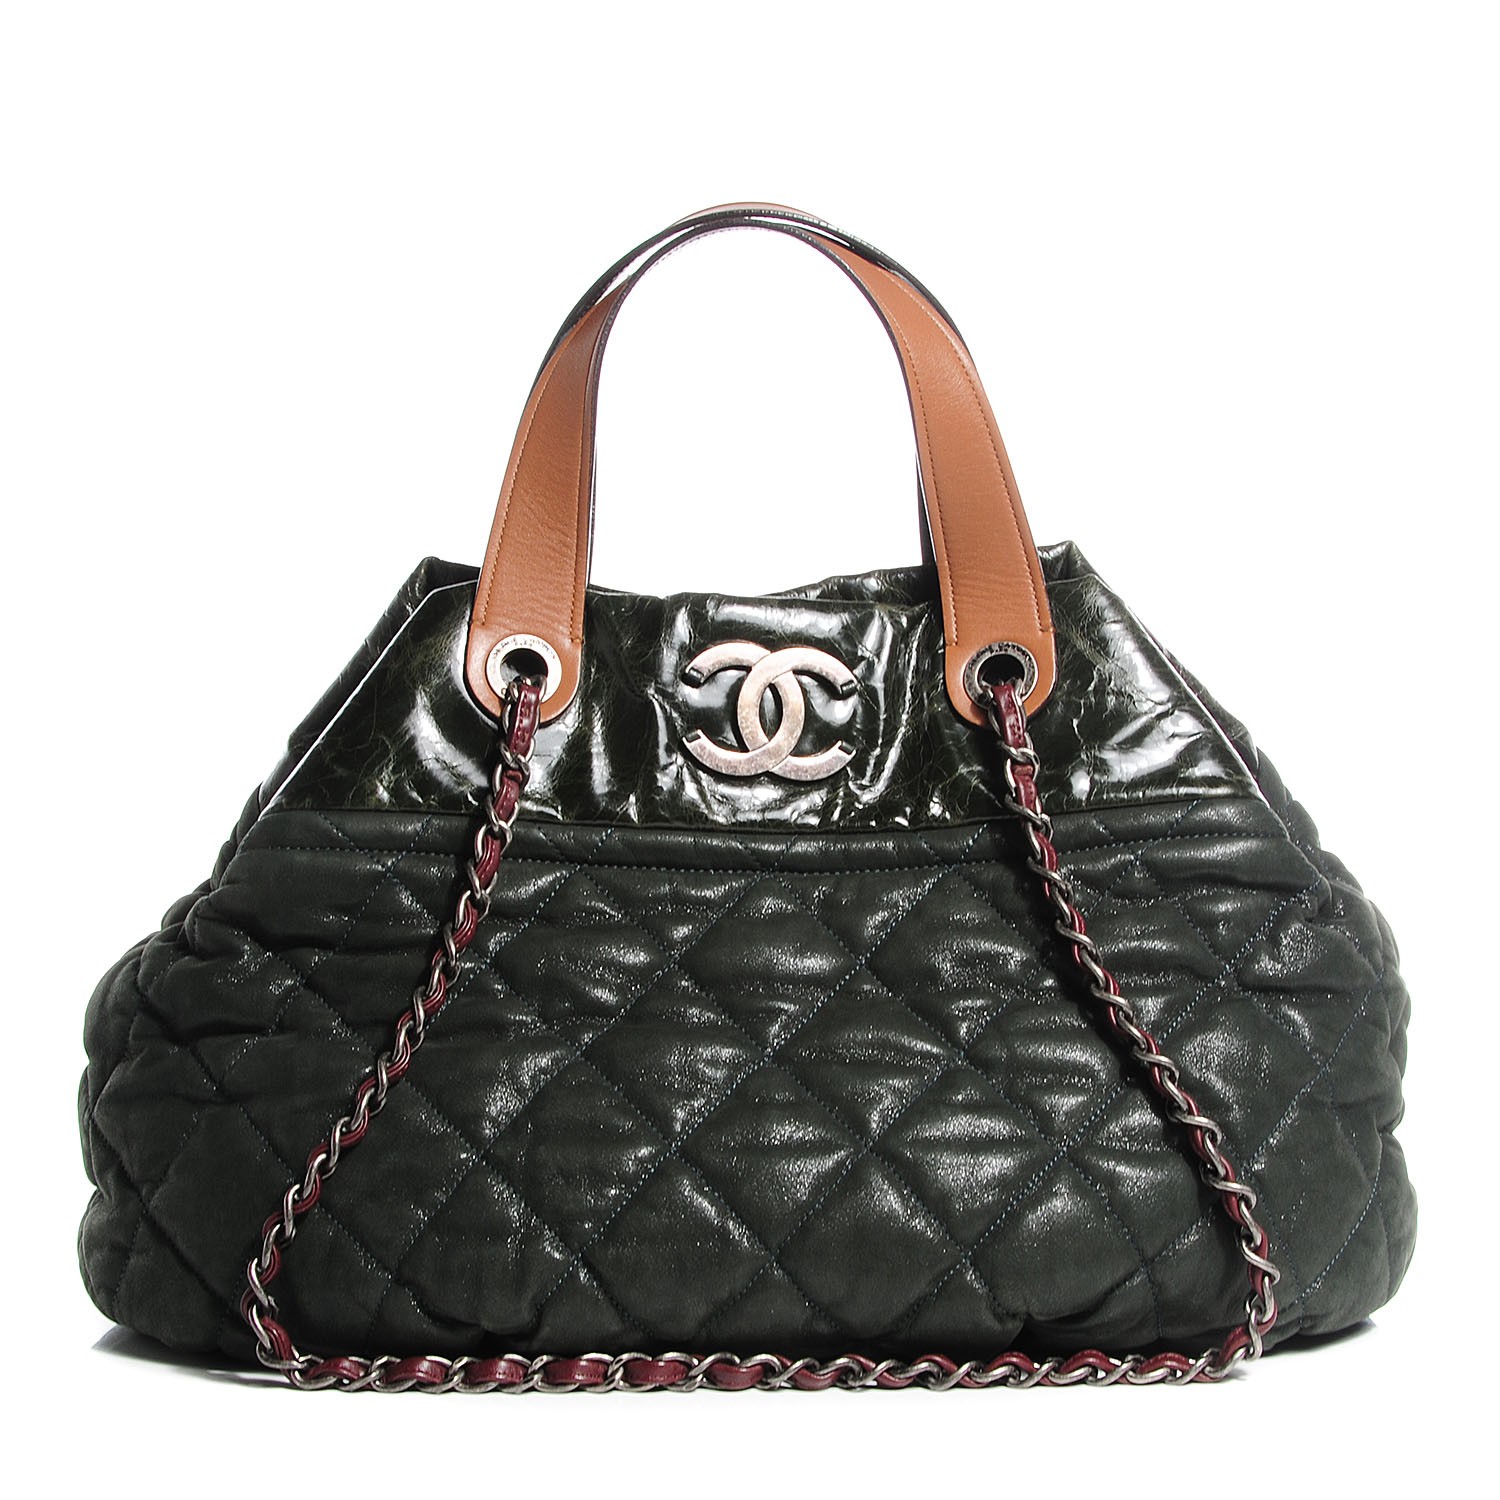 CHANEL Iridescent Calfskin Large In the Mix Tote Dark Green 96342